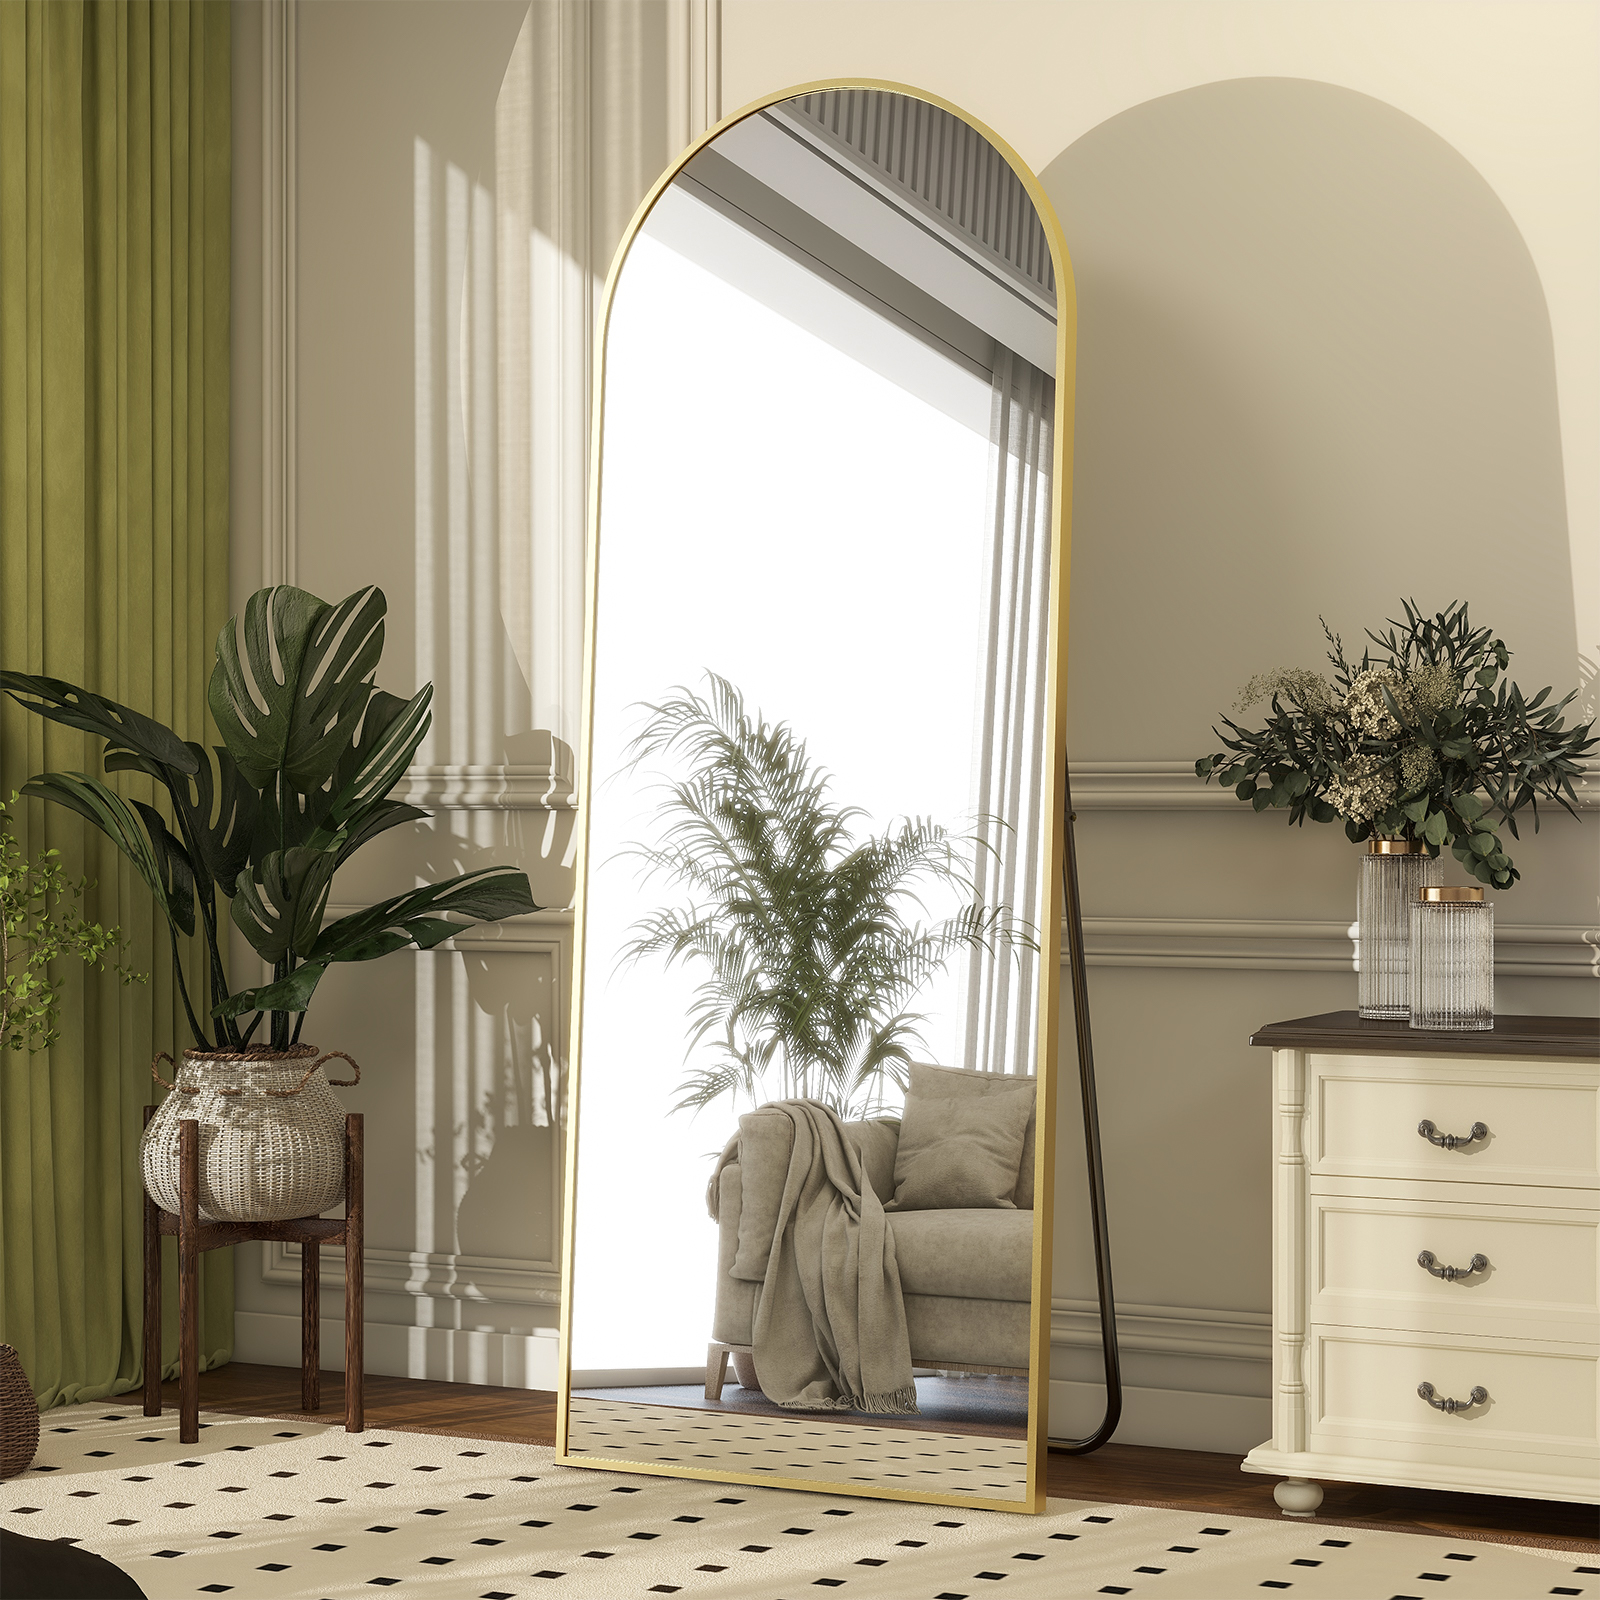 BEAUTYPEAK 64"x21" Full Length Mirror Arched Standing Floor Mirror Full Body Mirror, Gold - image 3 of 13